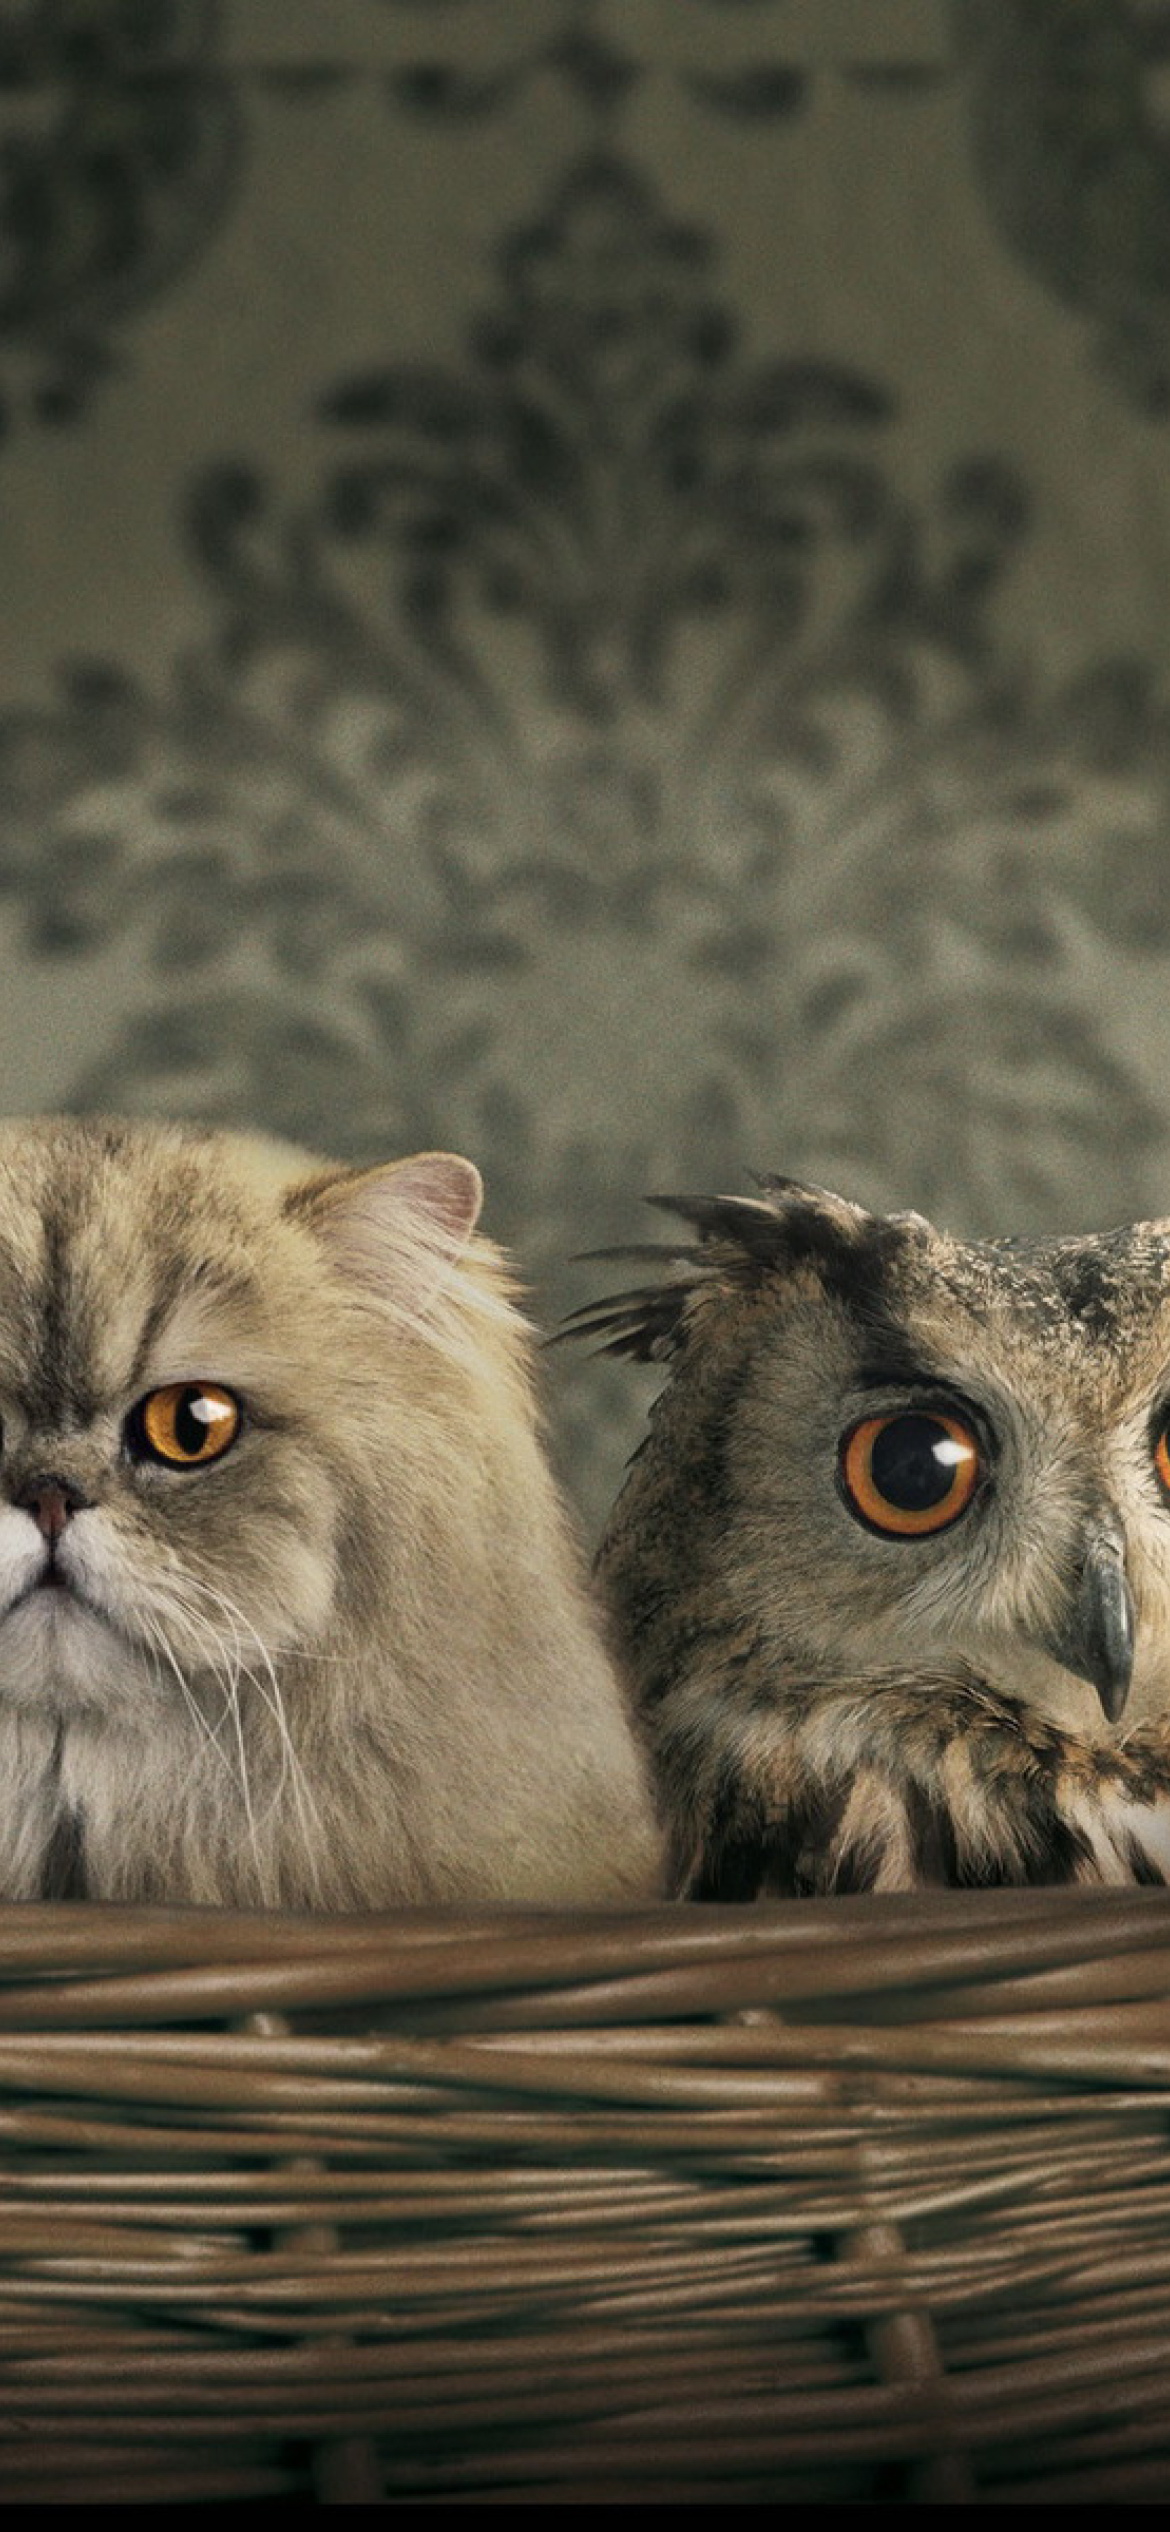 Cats and Owl as Third Wheel wallpaper 1170x2532